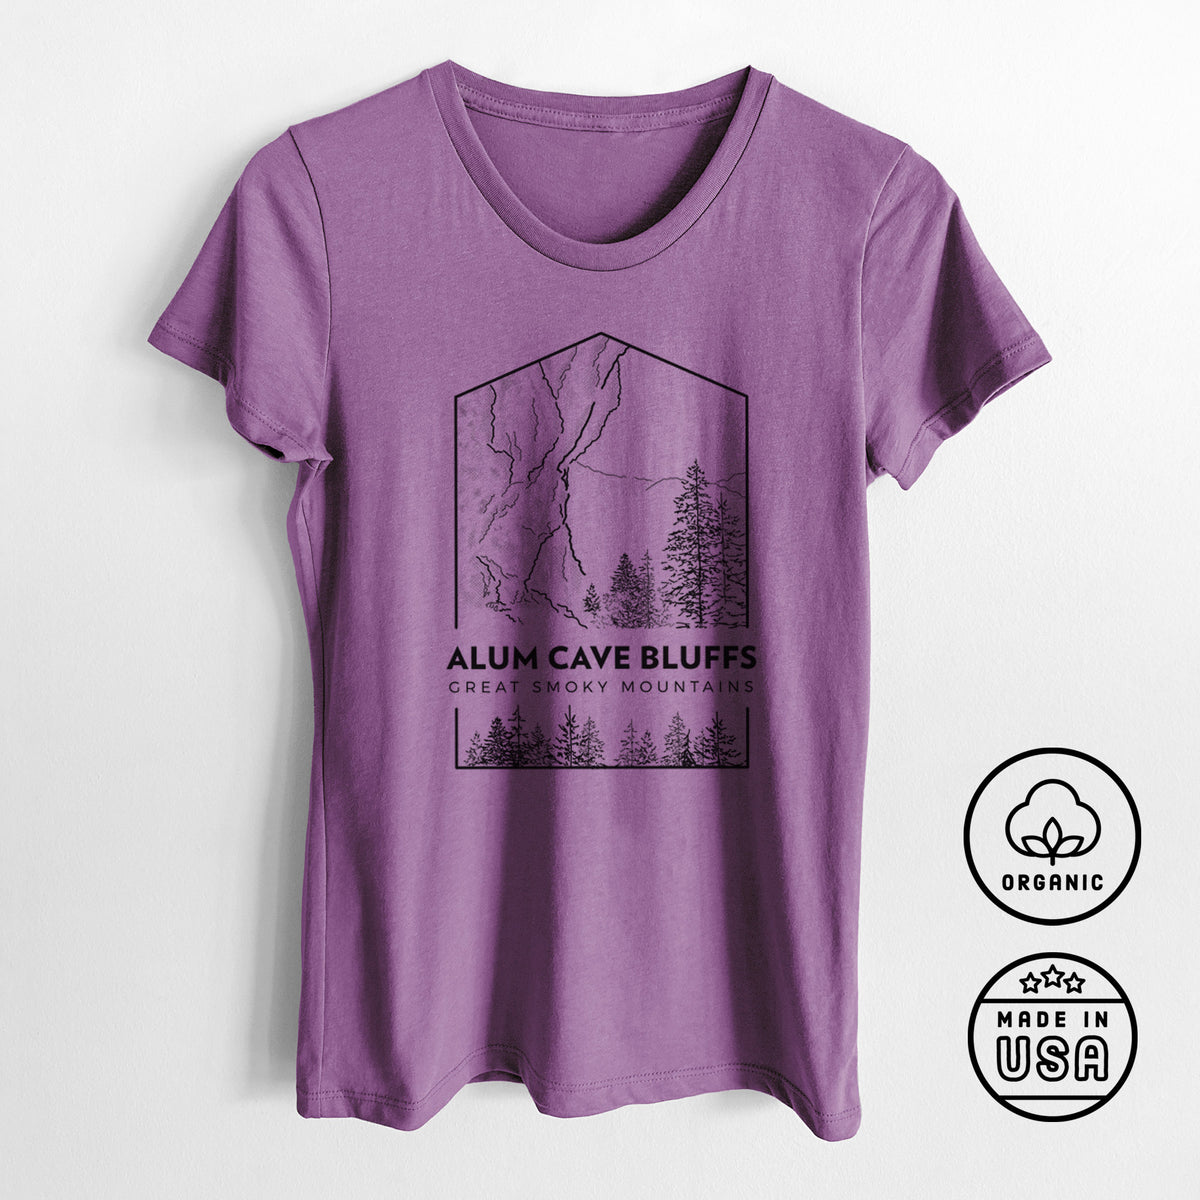 Alum Cave Bluffs - Great Smoky Mountains National Park - Women&#39;s Crewneck - Made in USA - 100% Organic Cotton